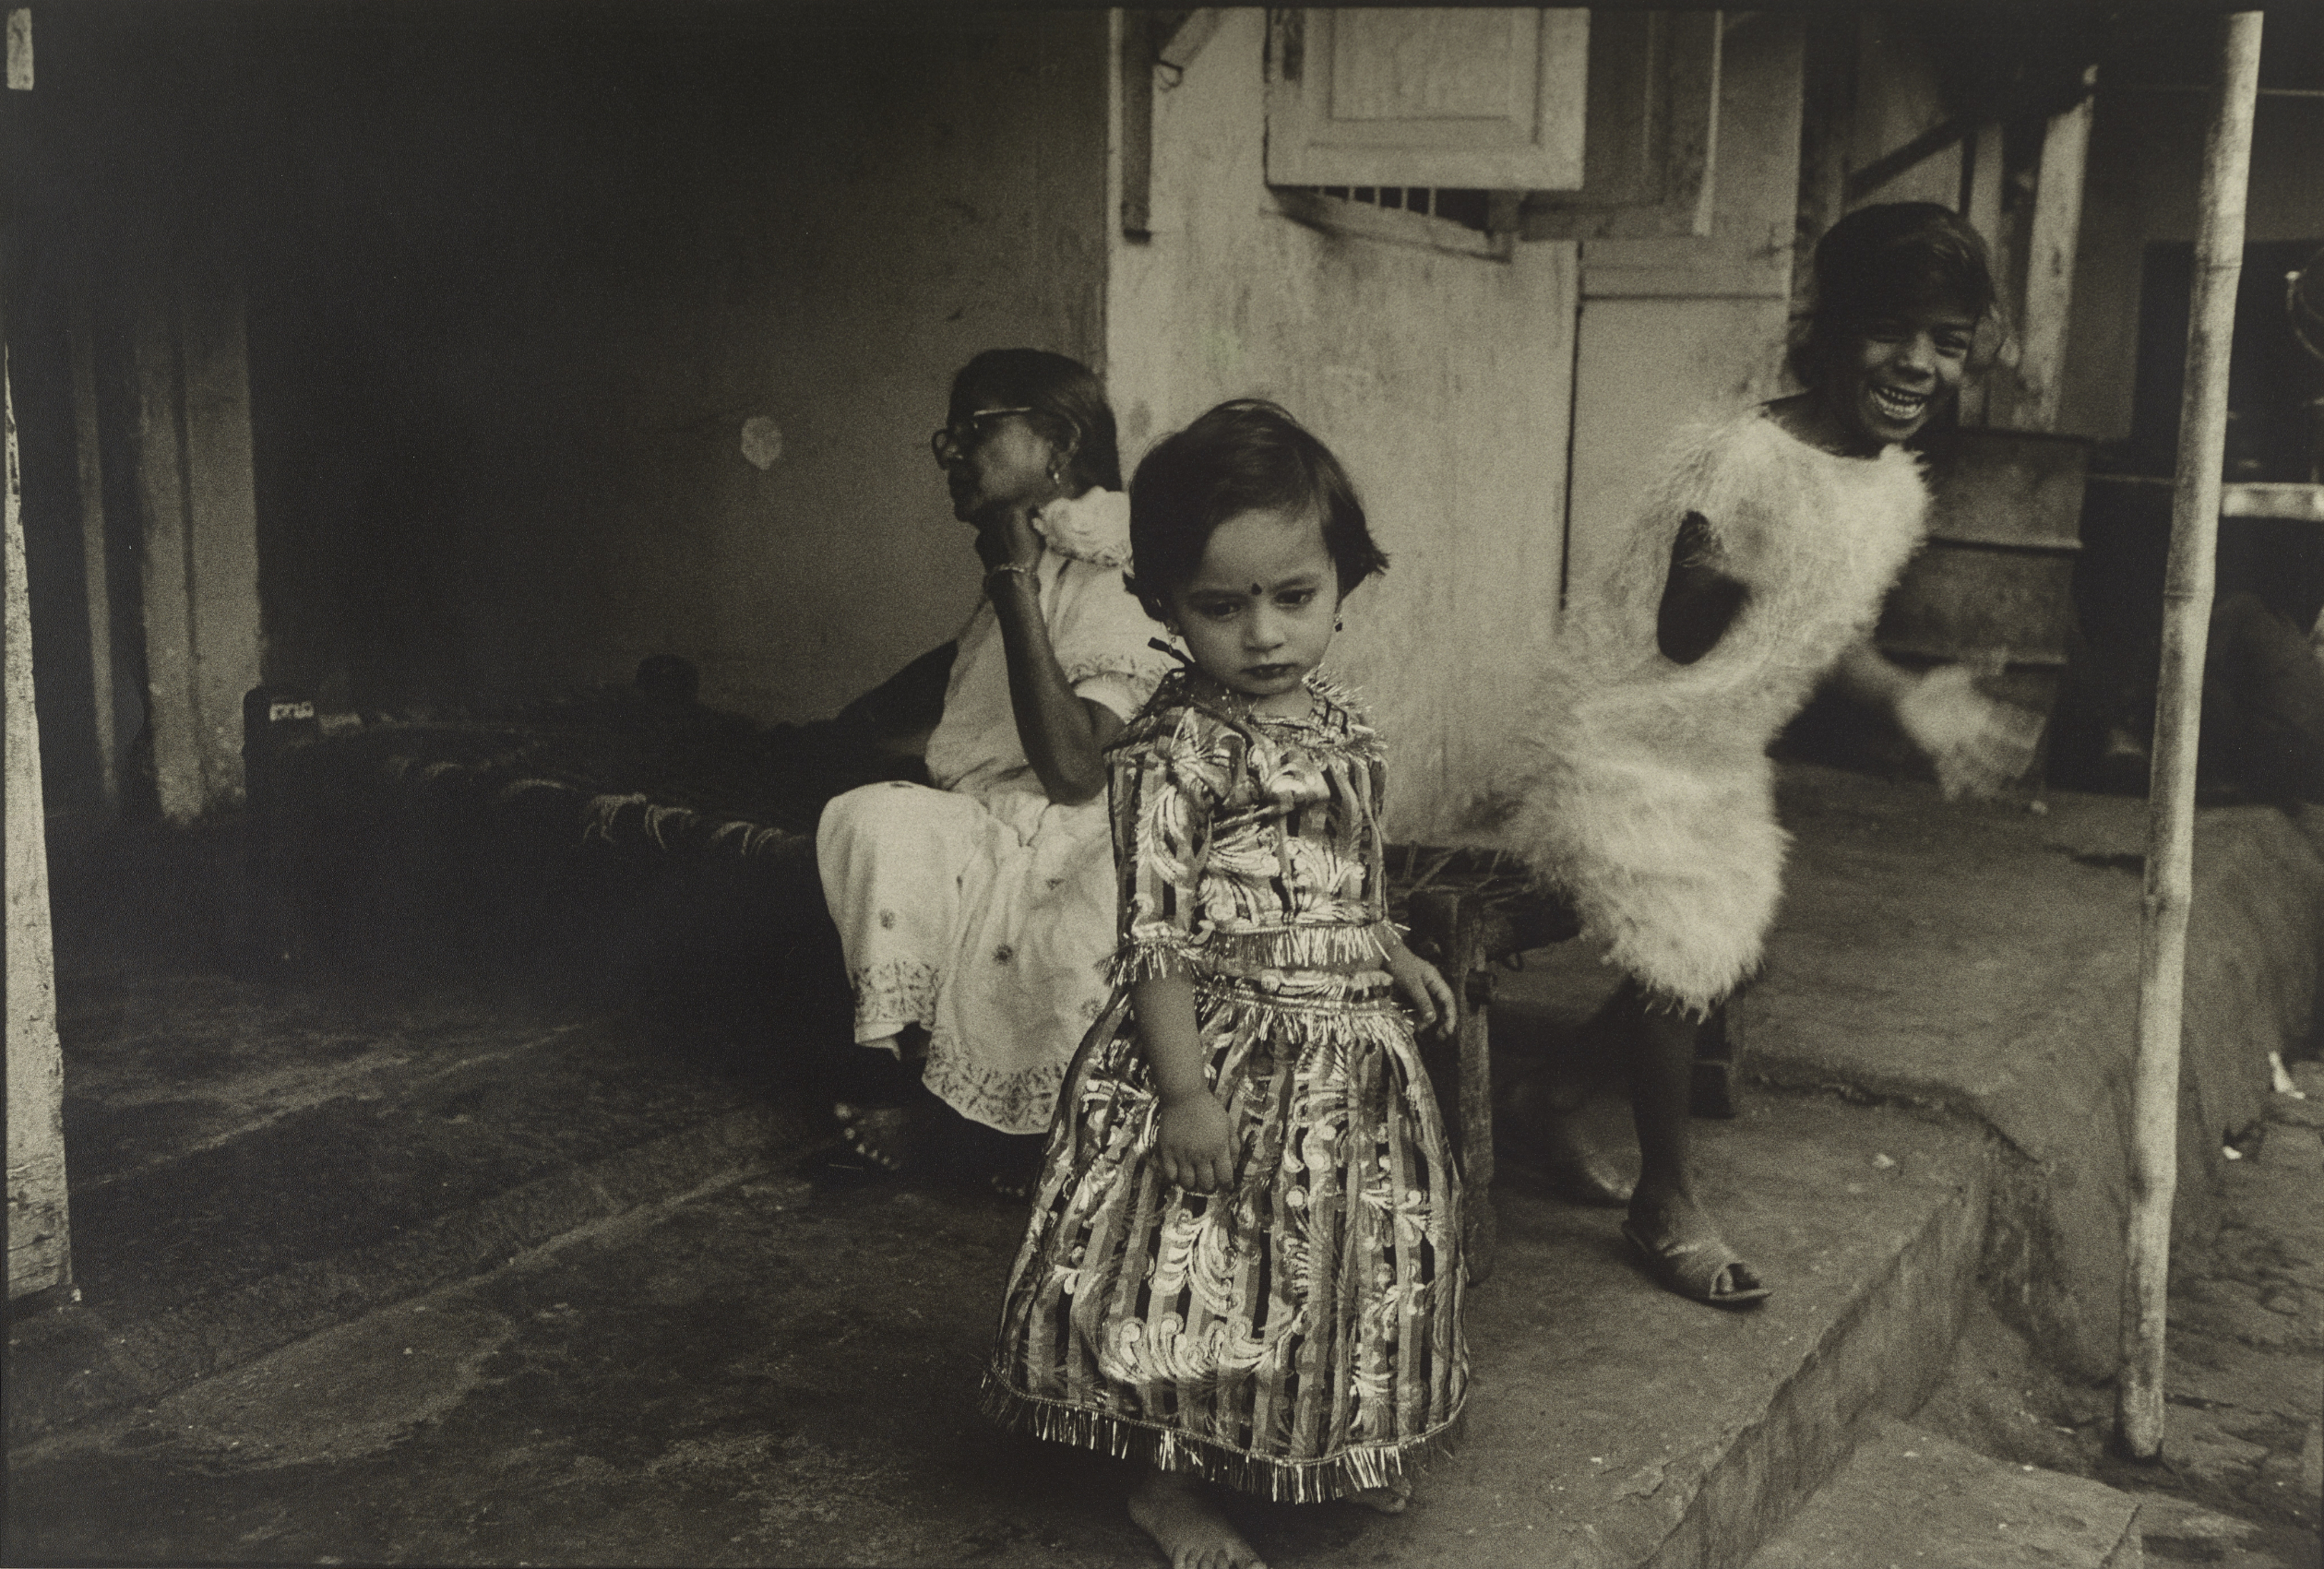 In a black-and-white photograph, one woman and two girls are gathered on the stoop outside a building. On the left, the woman in glasses wears white traditional dress and sits calmly, casting her gaze outside the frame. On the right, one little girl wearing a white feathery dress grins excitedly as she  rises from her seat, her hands blurred with motion. Front and center, the youngest little girl wears a striped dress and a bindi and looks downward with a serene expression.